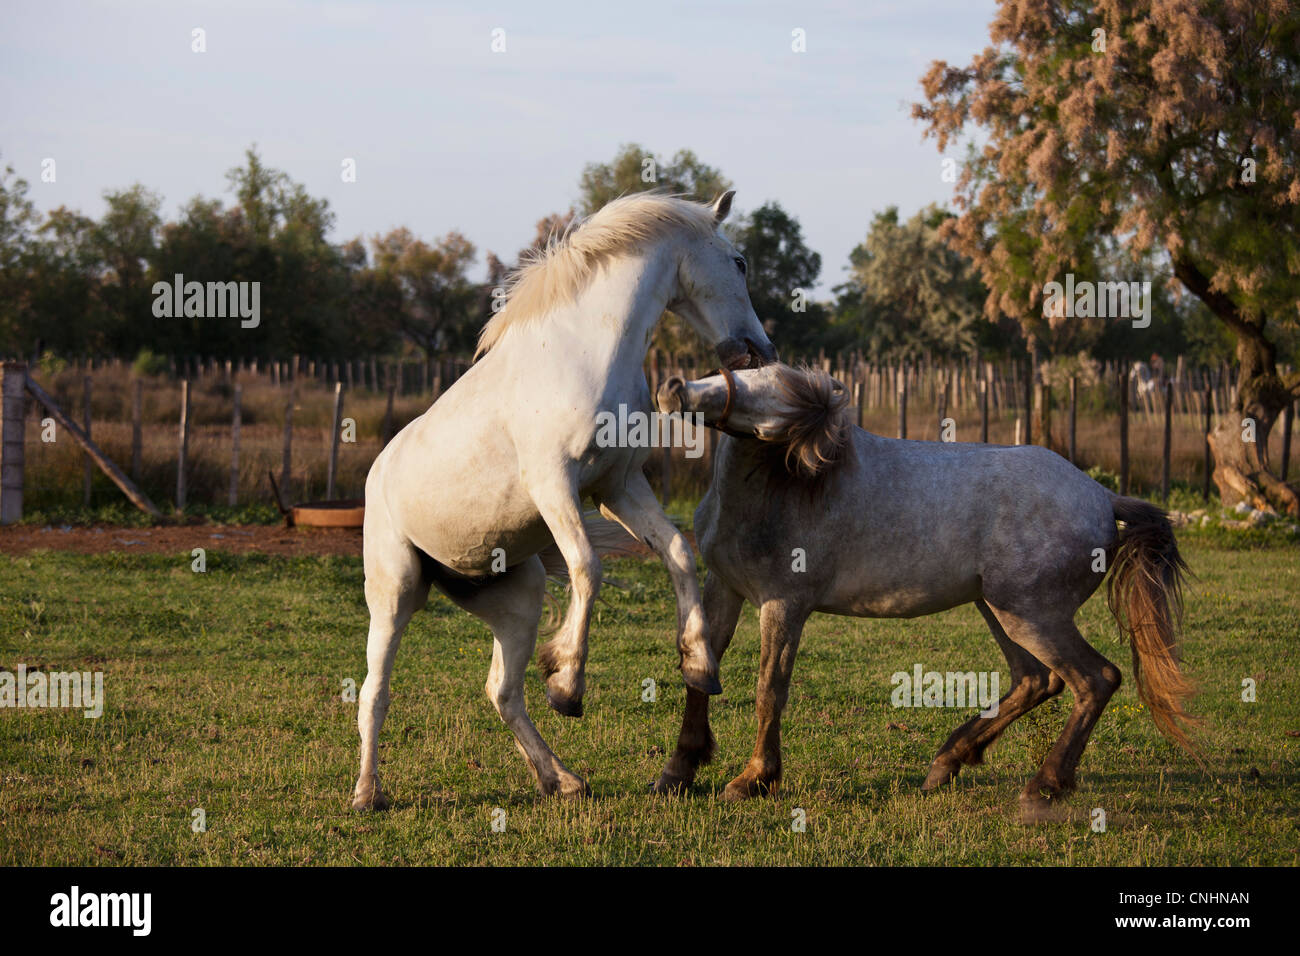 Two horses playing in a fenced Stock Photo